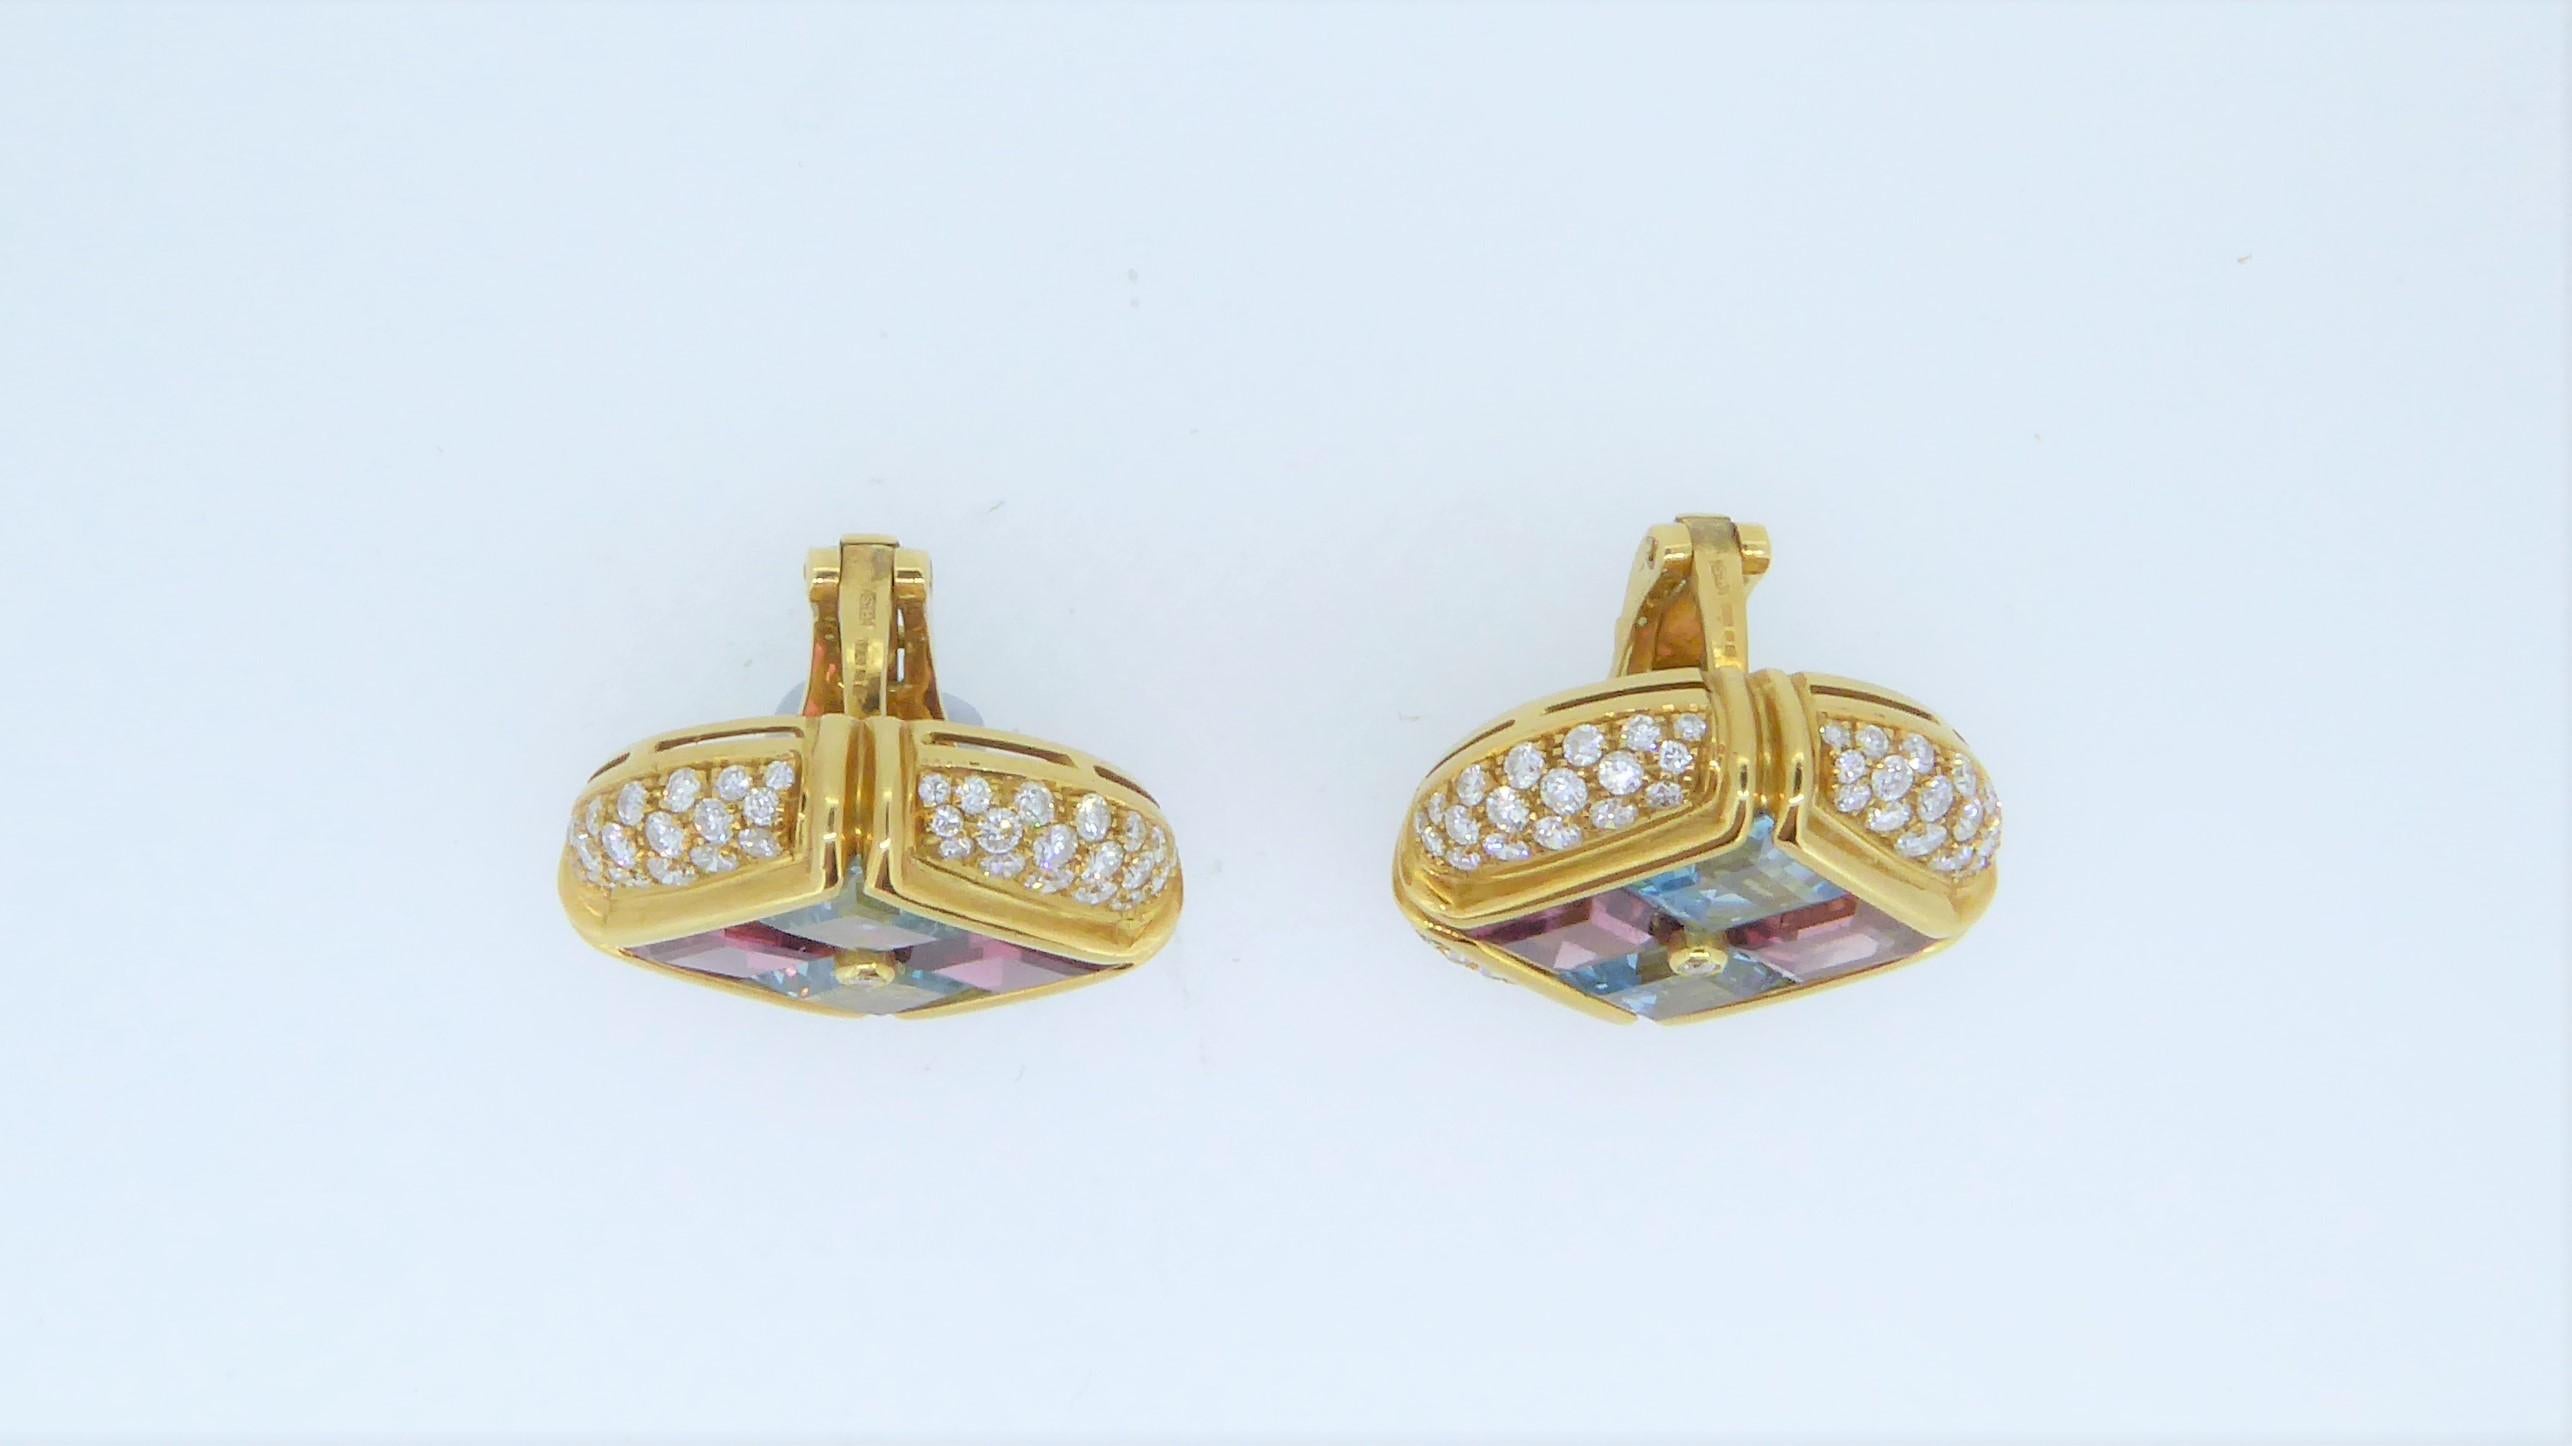 A Pair Of Bulgari 18 Carat Yellow Gold Multi-Gem And Diamond Carré Earrings. 
The earrings adorned with topaz and tourmaline, within a pavé-set diamond border. Signed 'Bulgari' '750' and numbered. Weighs approximately 34.7 grams in total. Each